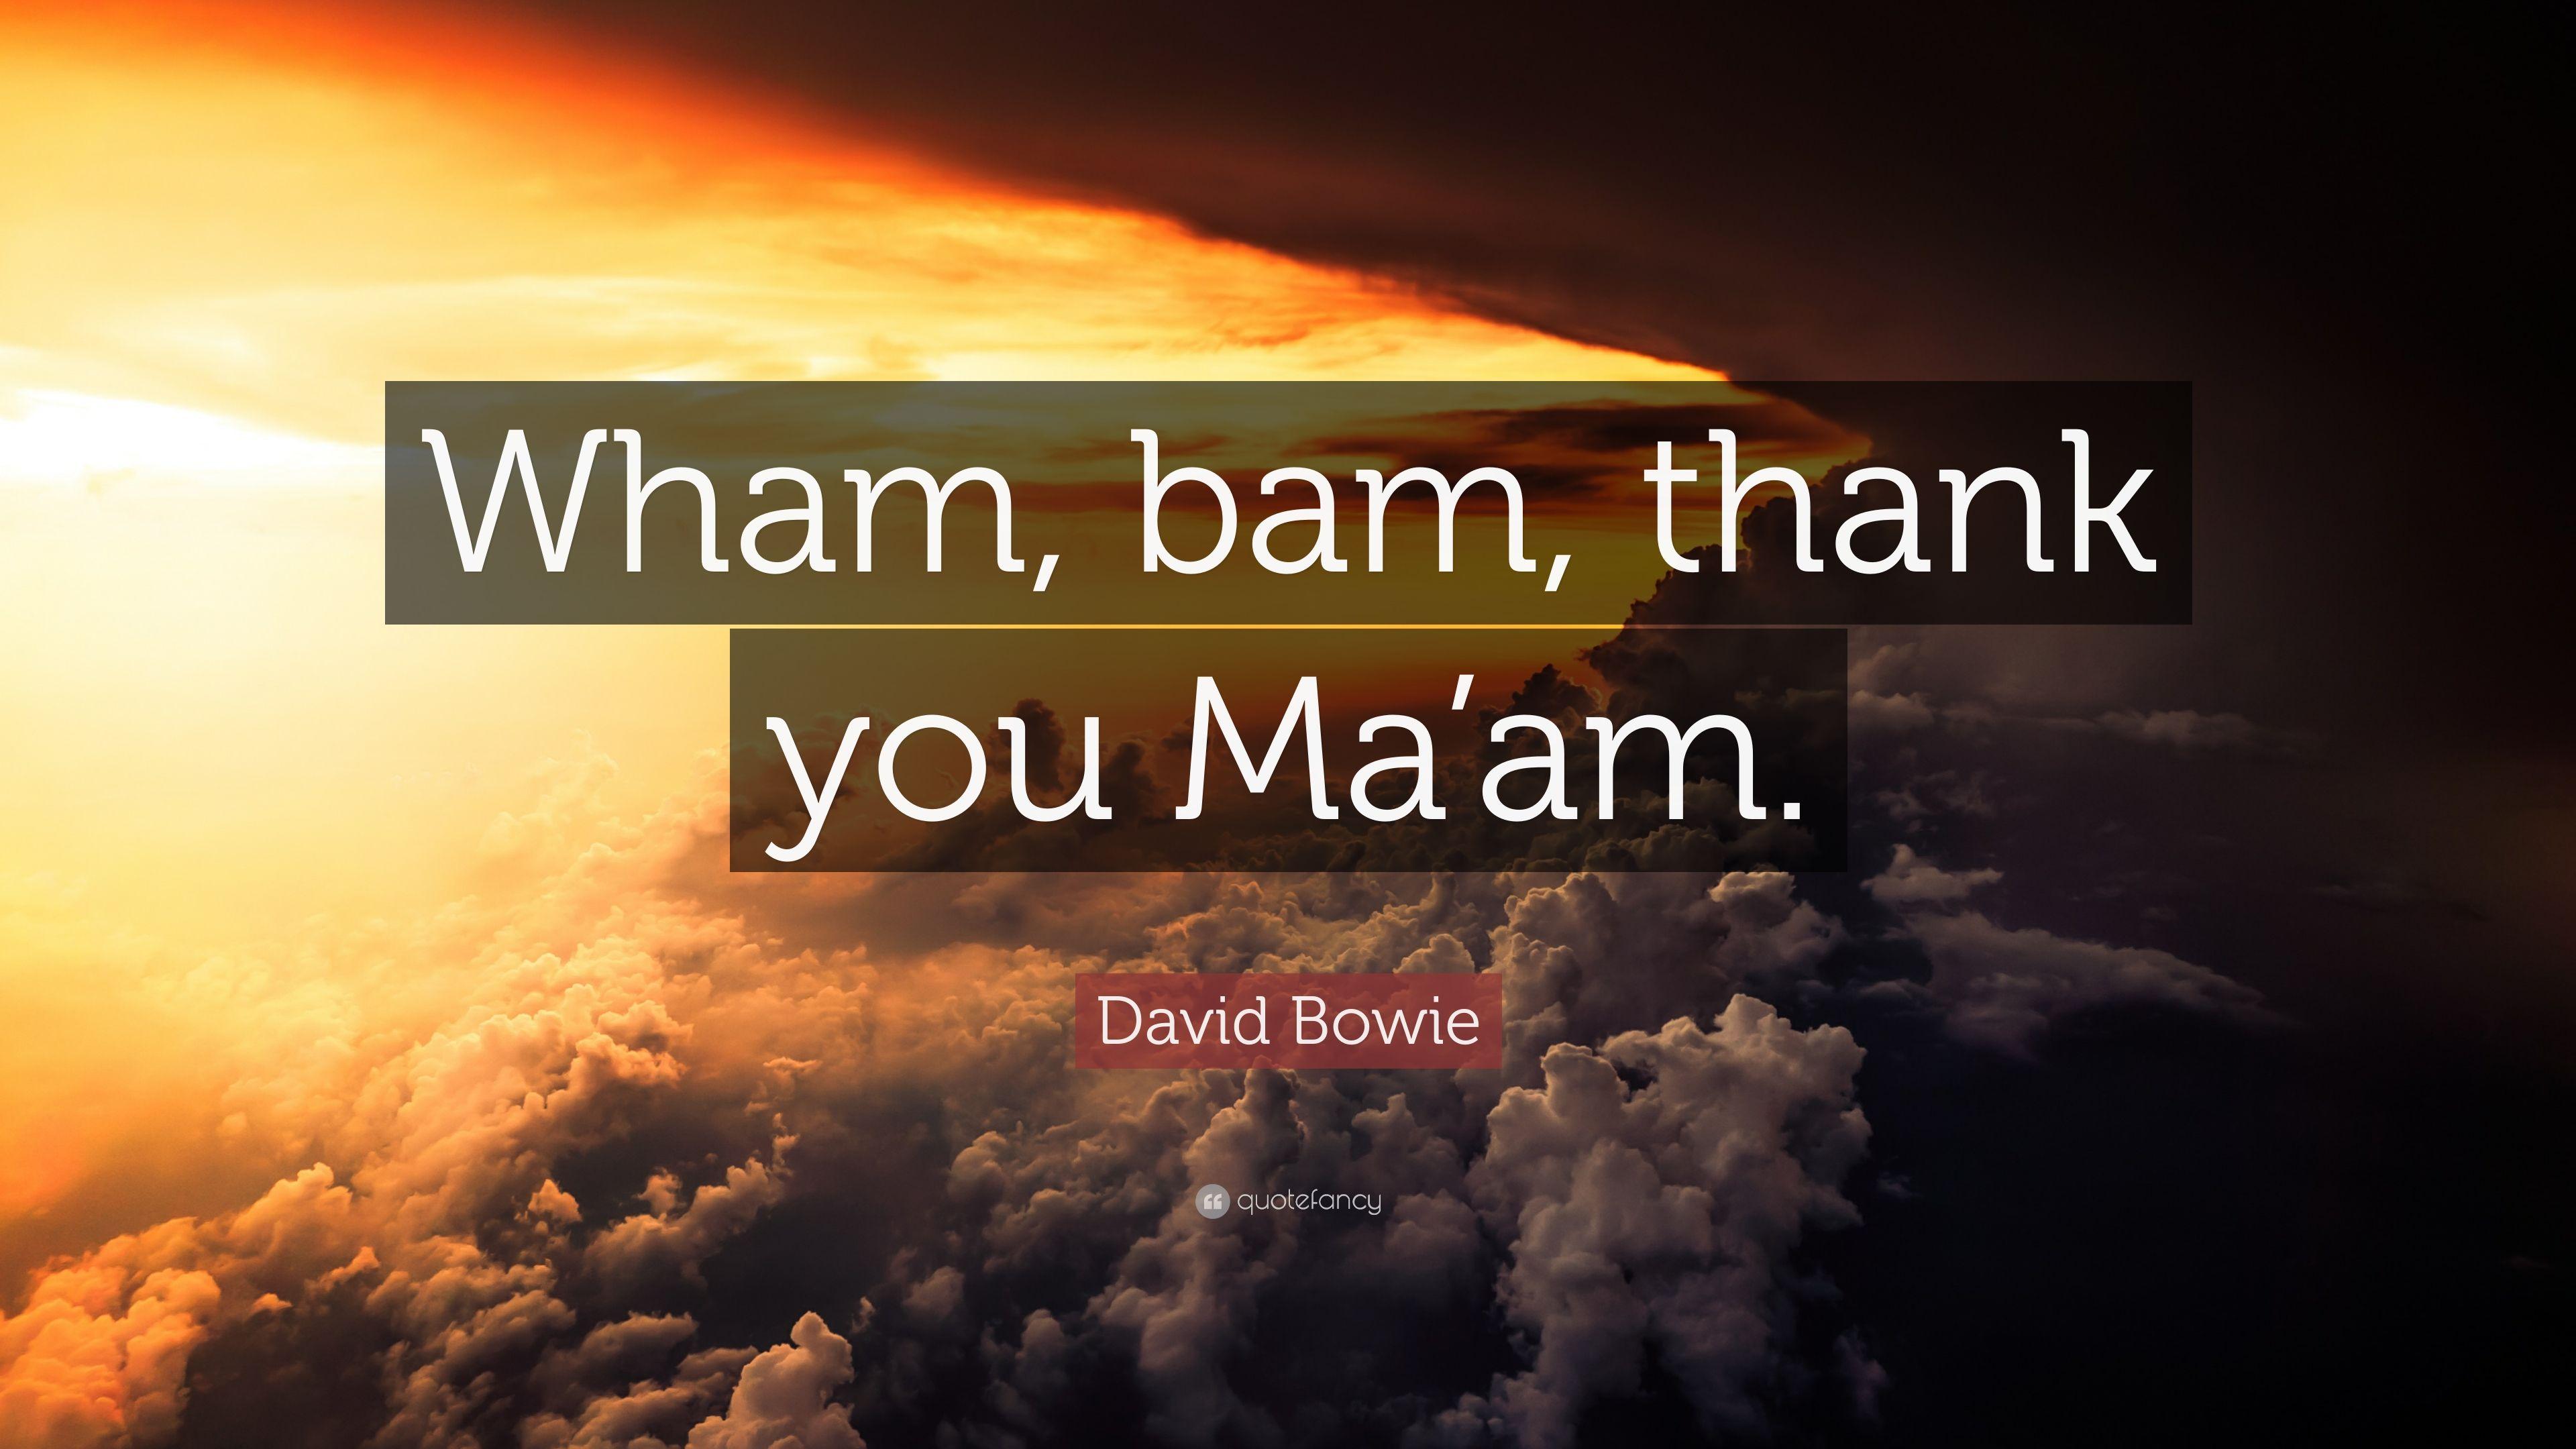 David Bowie Quote: “Wham, bam, thank you Ma'am.” 7 wallpaper